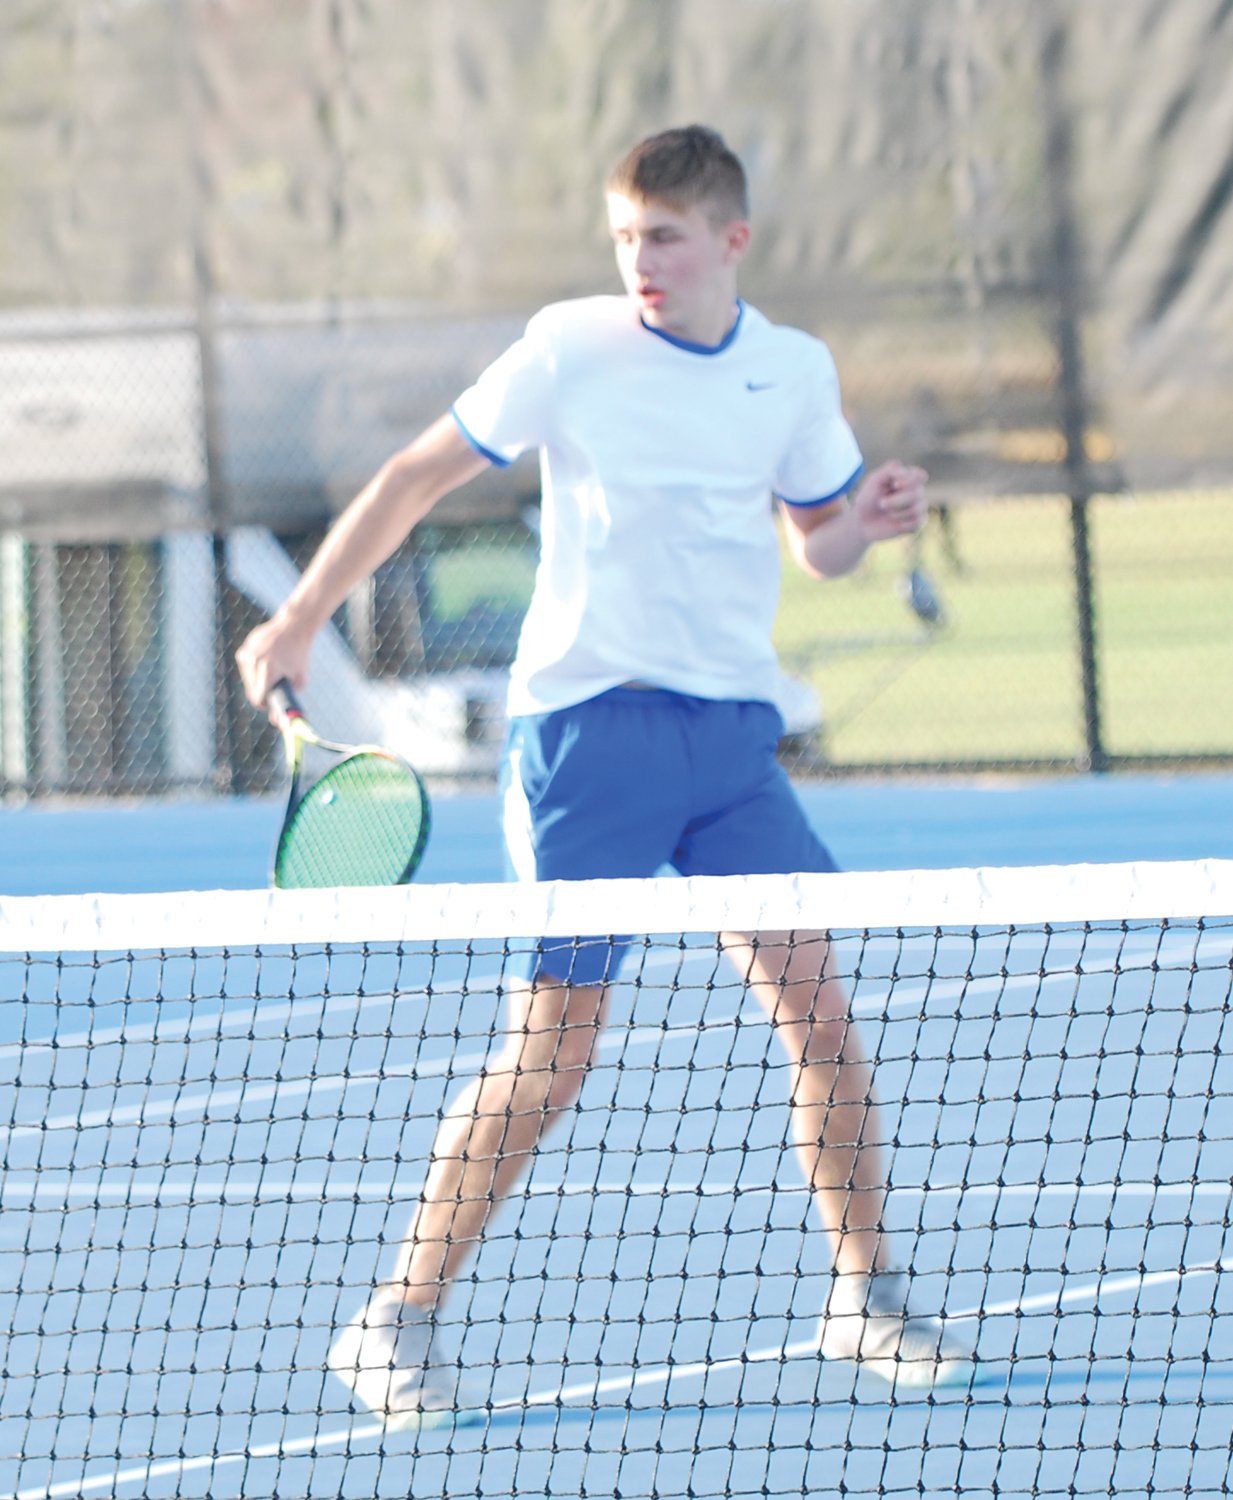 Crawfordsville’s Thatcher Gambrel sealed the sectional win for the Athenians at No. 2 singles by defeating North Montgomery’s Alex Chapman 6-3, 7-5